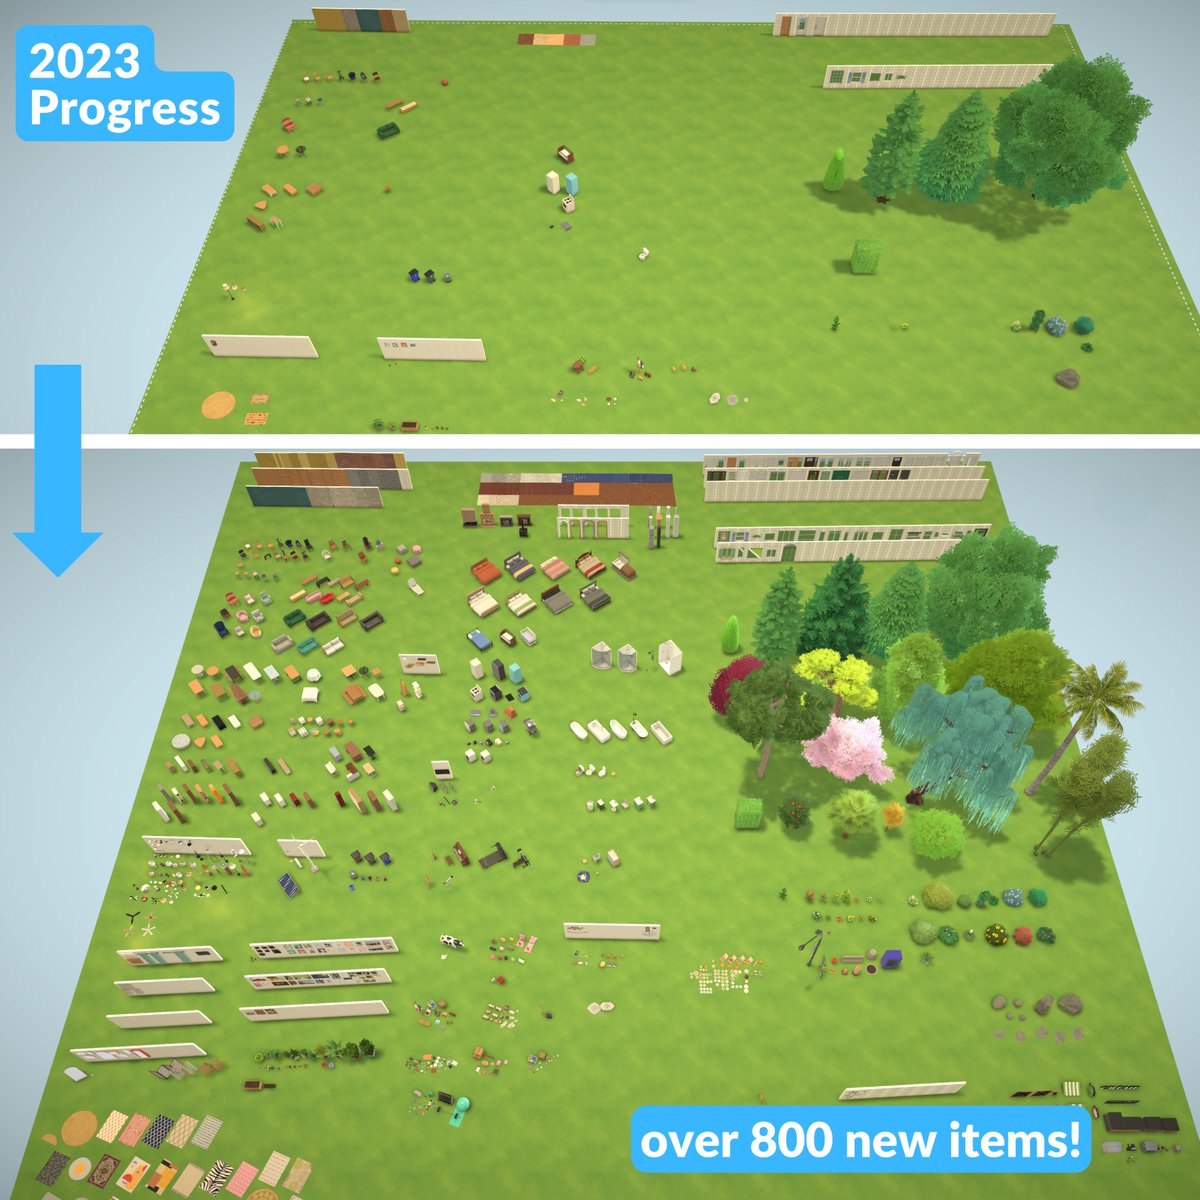 🛠️ 2023 was a big year for Paralives ⚙️ while our programmers focused on gameplay features, our artists added hundreds of new items to the game!! we’ll be showing you our progress on the live mode soon 🥰